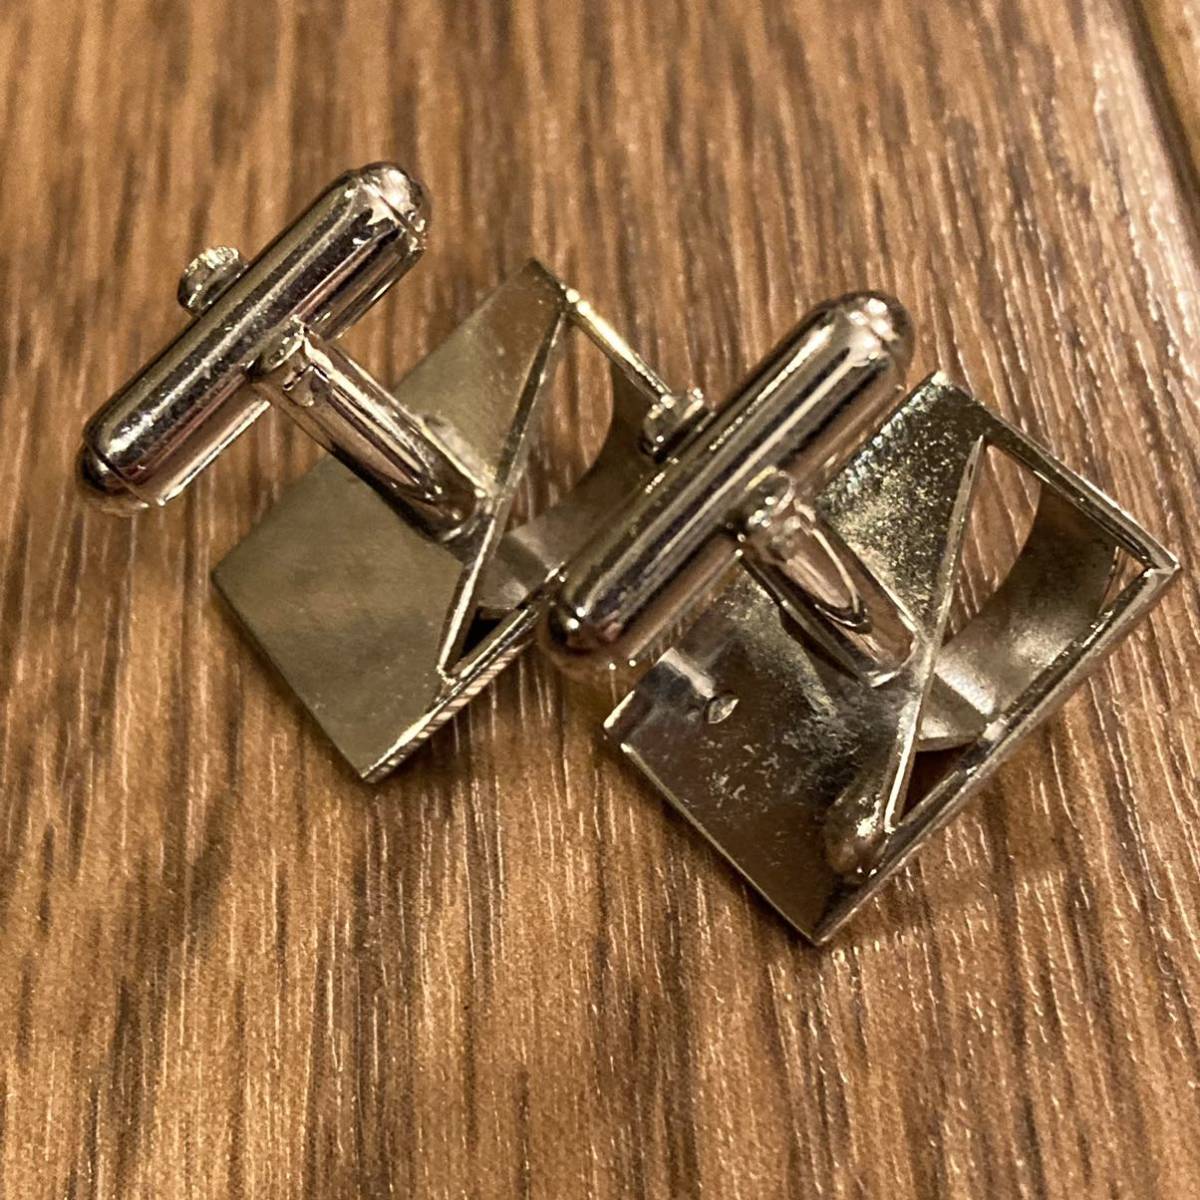  free shipping US Vintage cuff links silver tone 